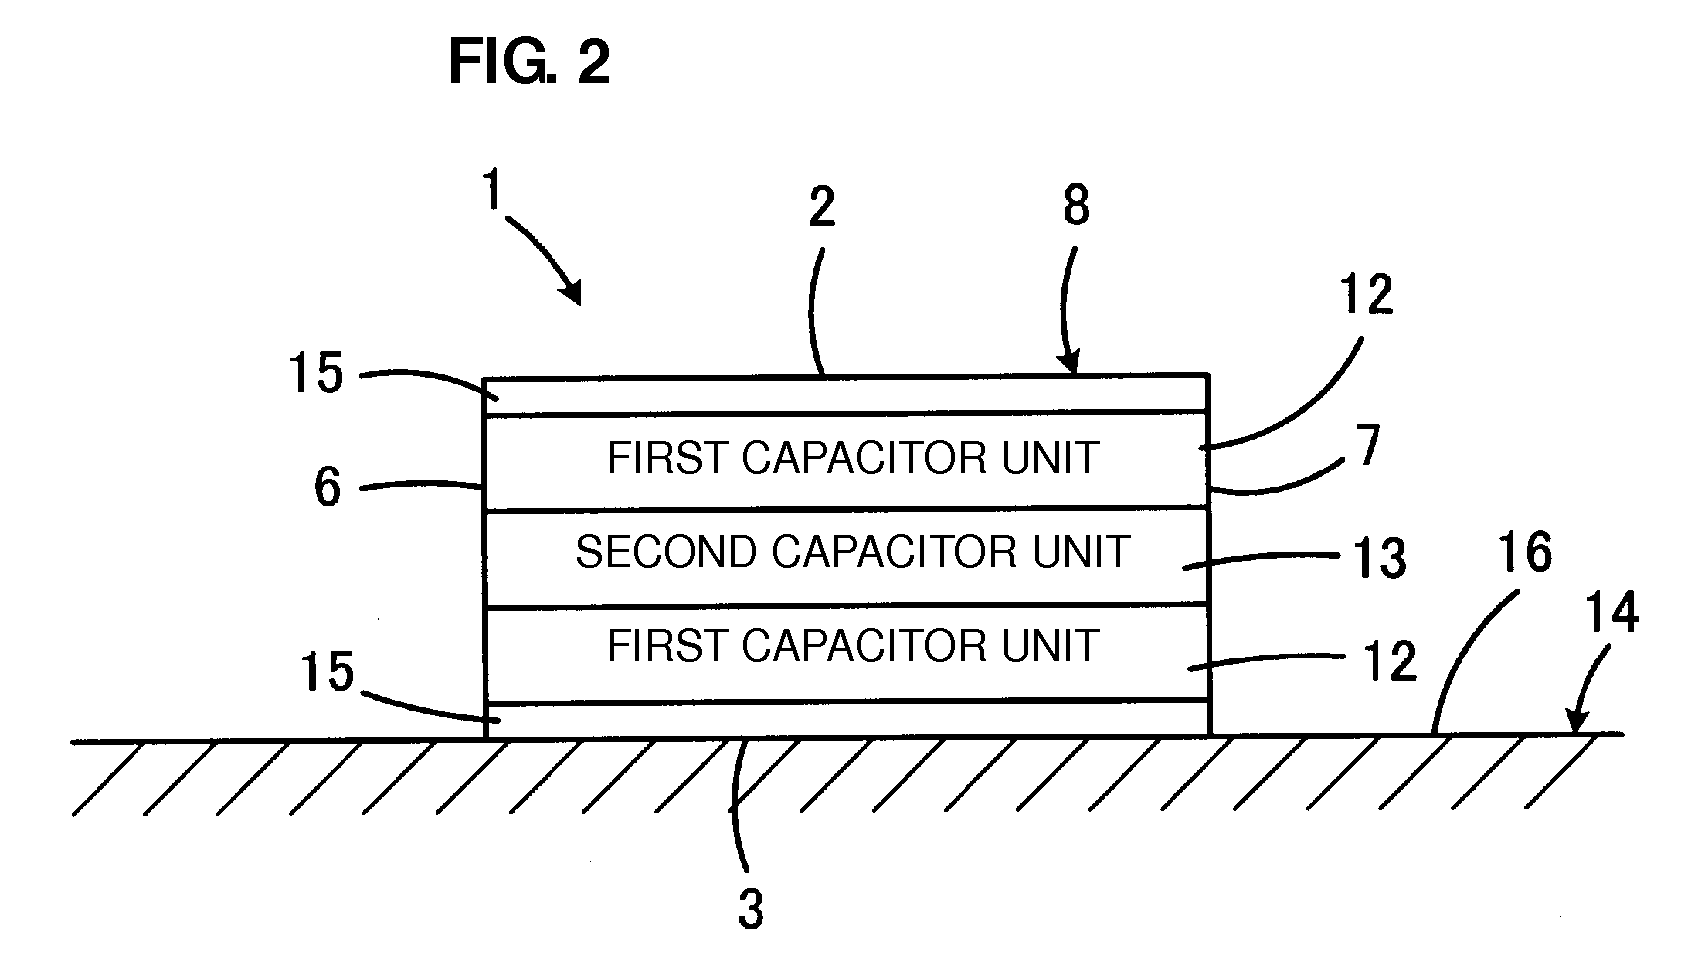 Multilayer capacitor having low ESL and easily controllable ESR